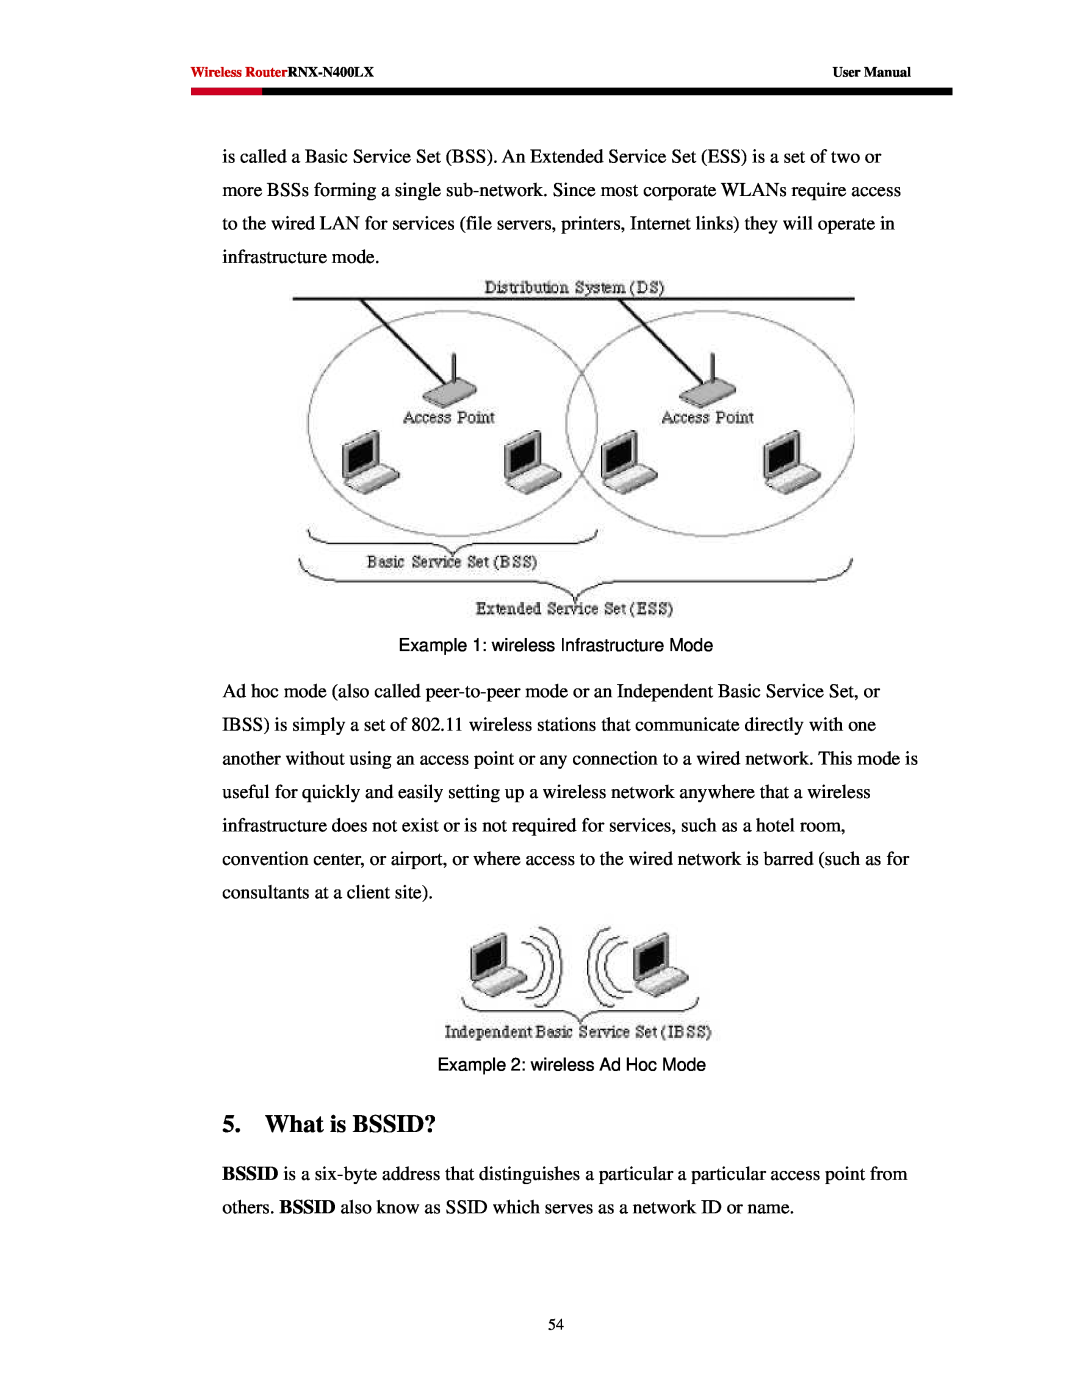 Rosewill RNX-N400LX user manual What is BSSID?, Example 1 wireless Infrastructure Mode, Example 2 wireless Ad Hoc Mode 